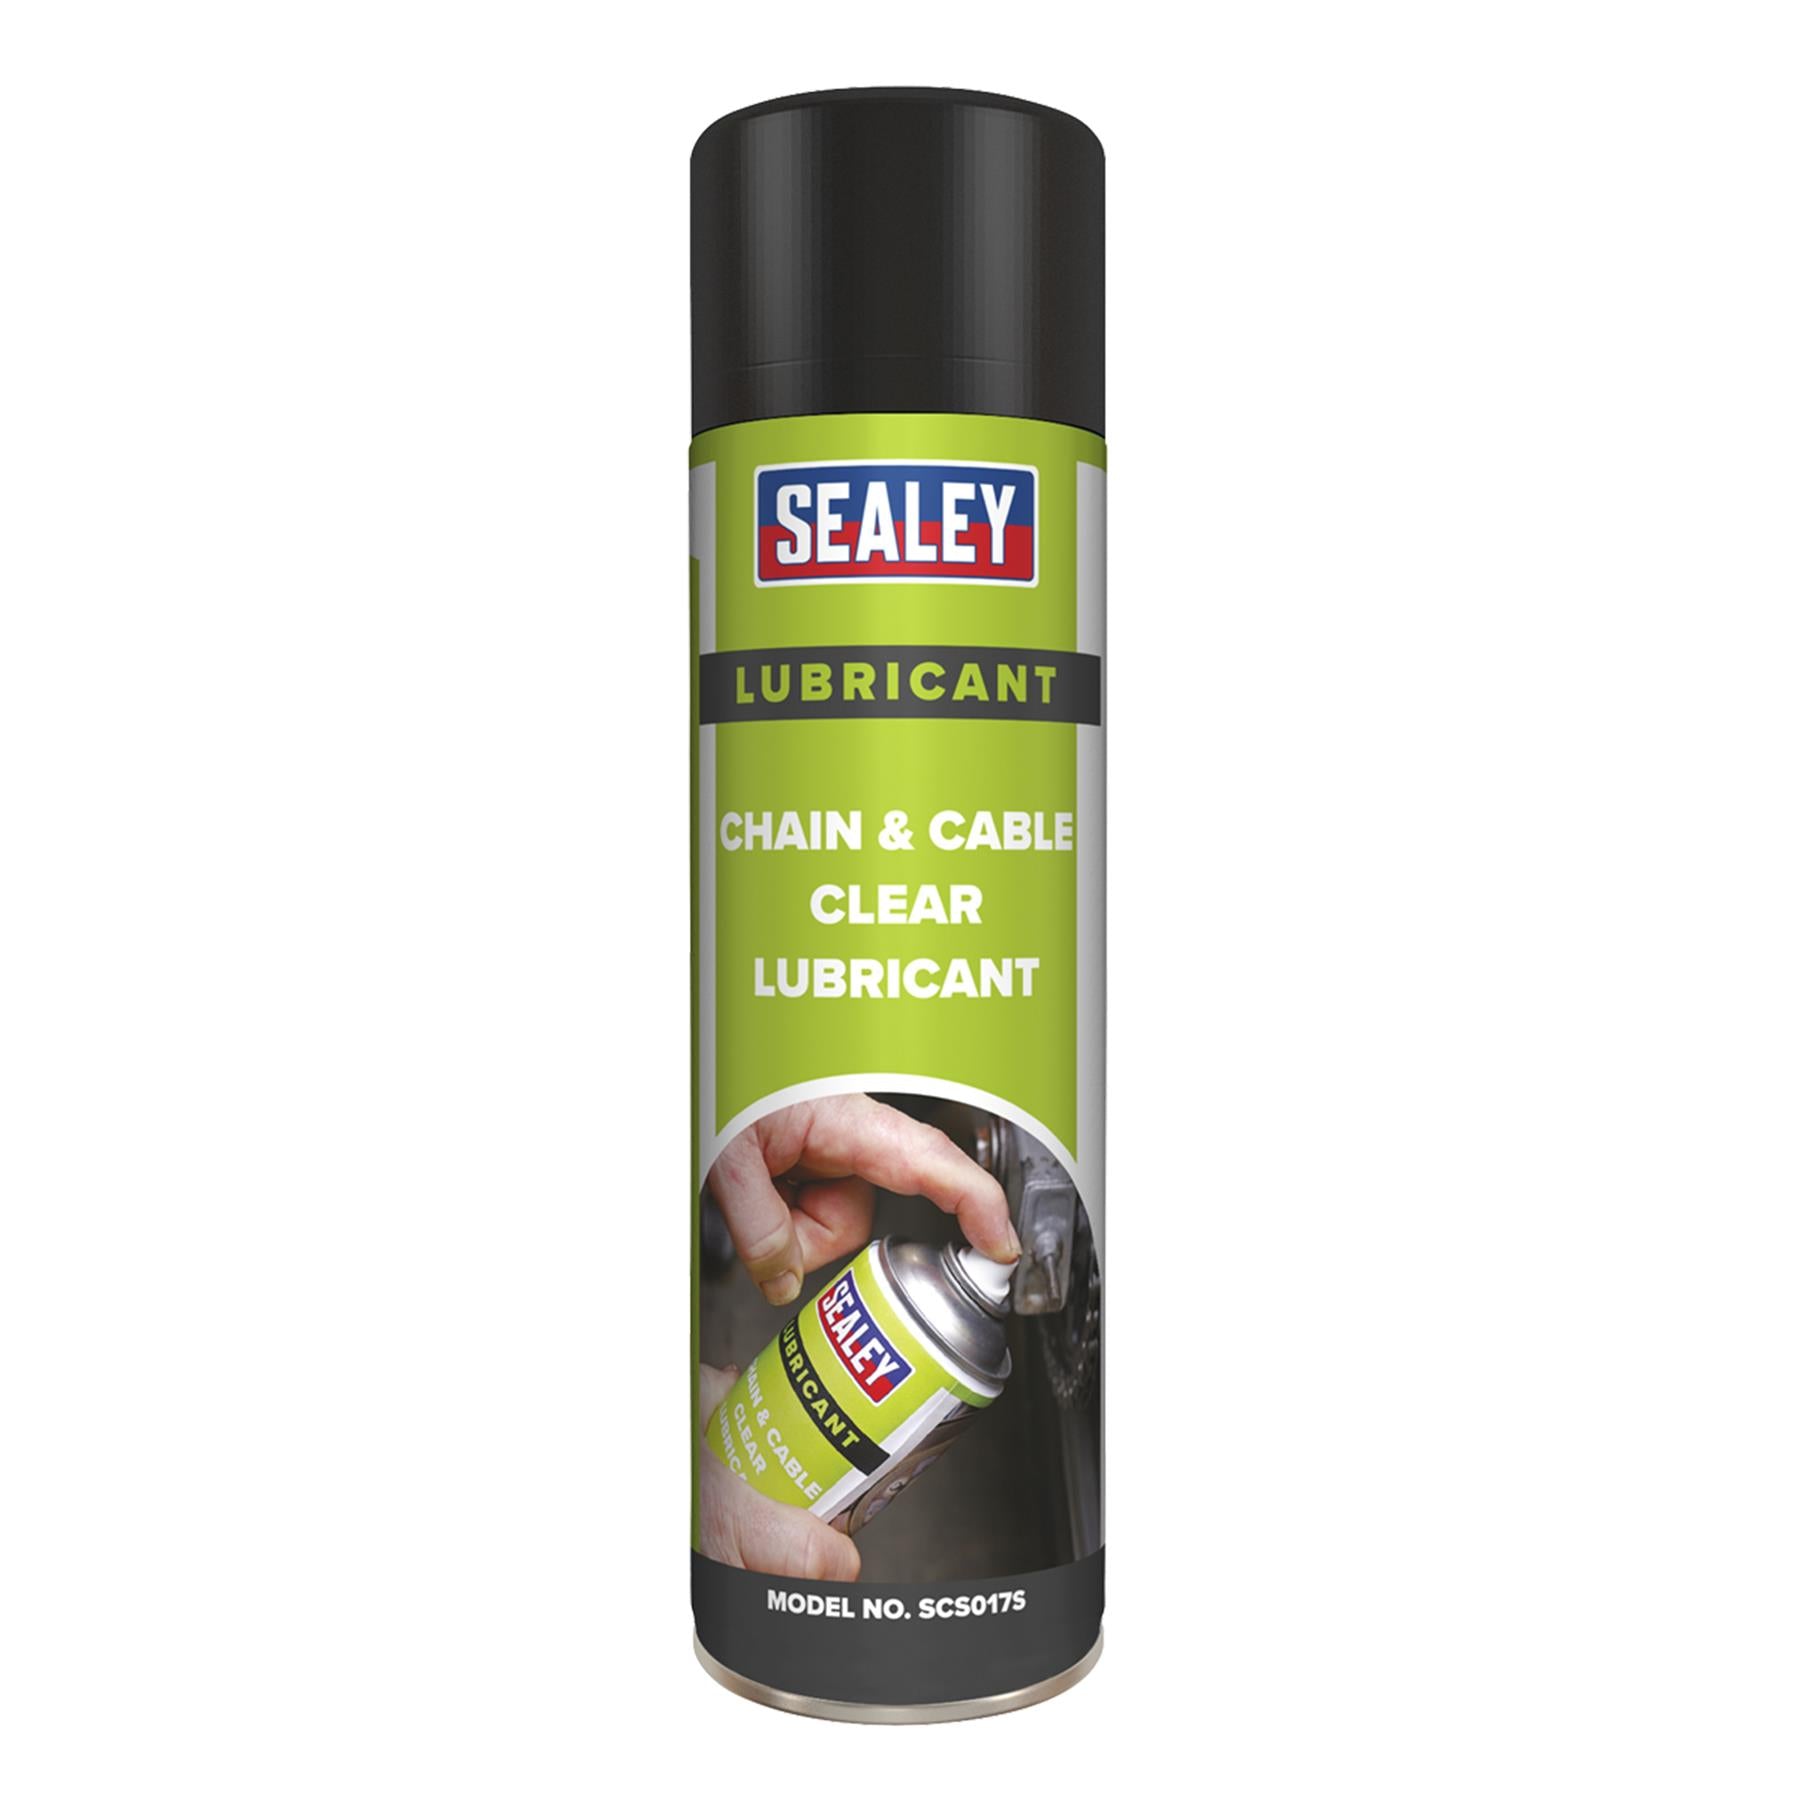 Sealey Chain & Cable Clear Lubricant 500ml Single